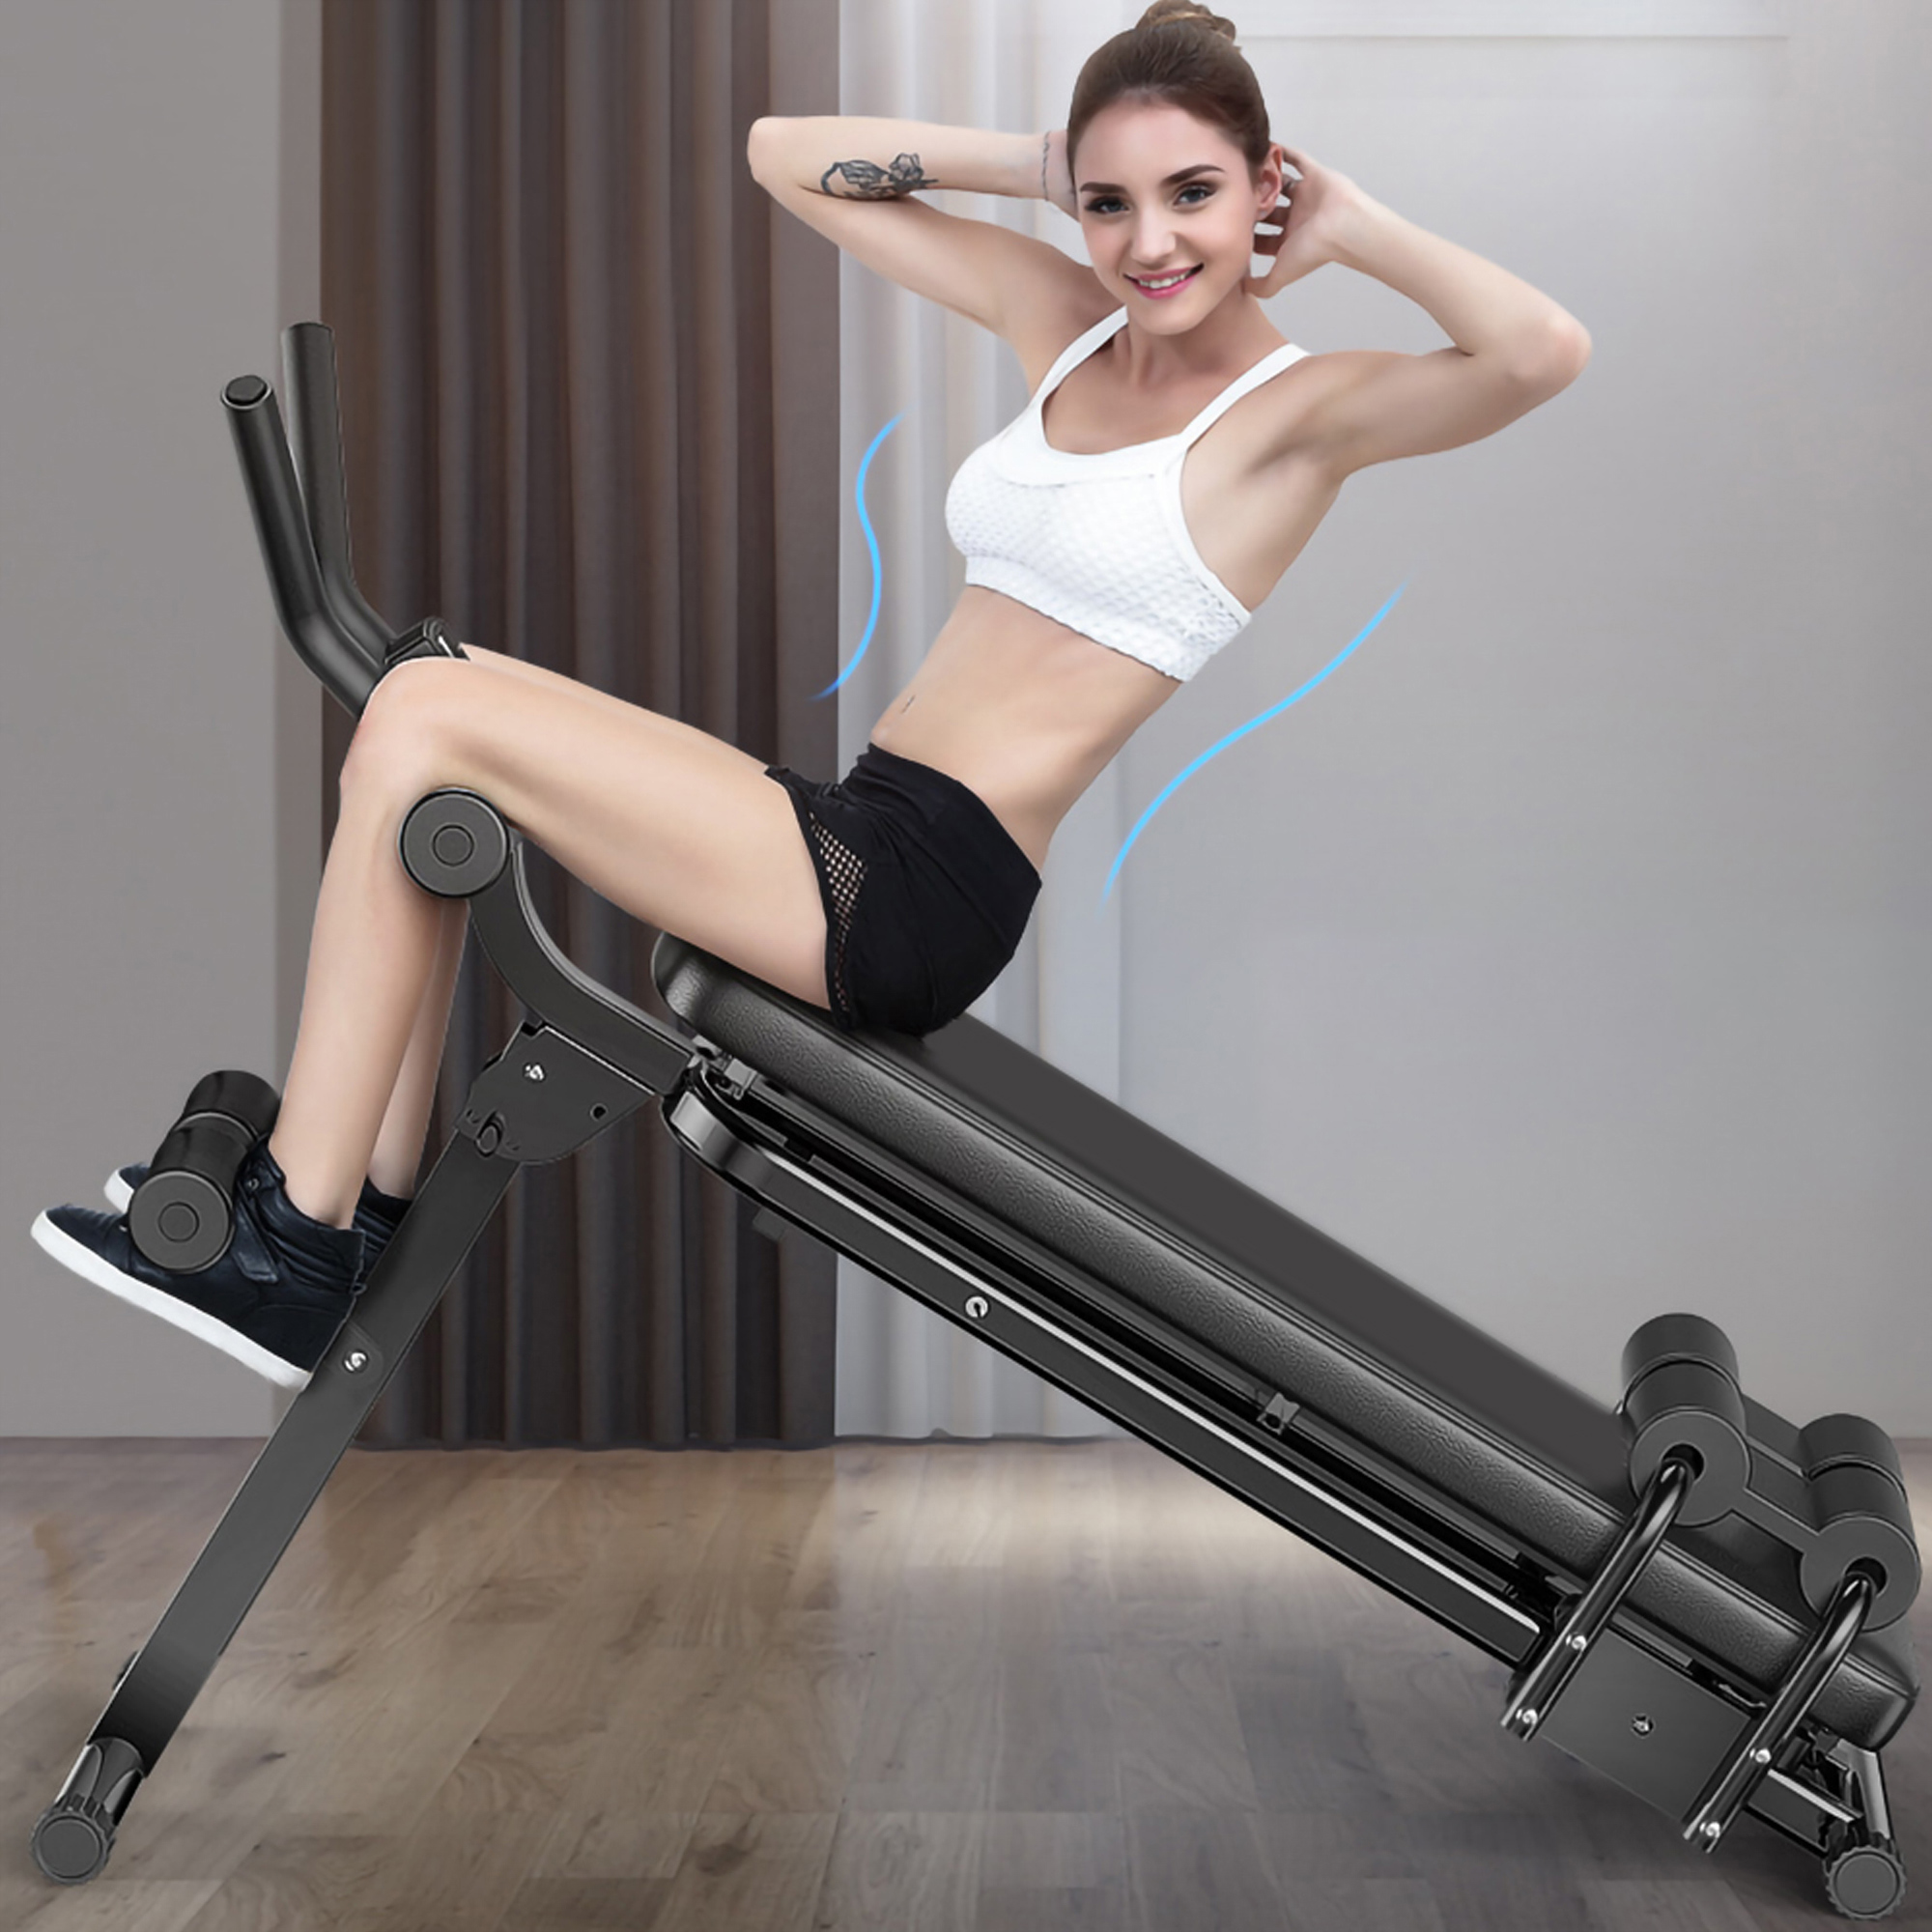 Abdominal Trainer Weight Bench Sit up Bench Ab Abdominal Crunch Ab Trainee Abdominal Exercise Equipment  Home Gym Lifting Training Leg Exercise Fitness Weight Bench for Abdominal Muscles Build - image 2 of 8